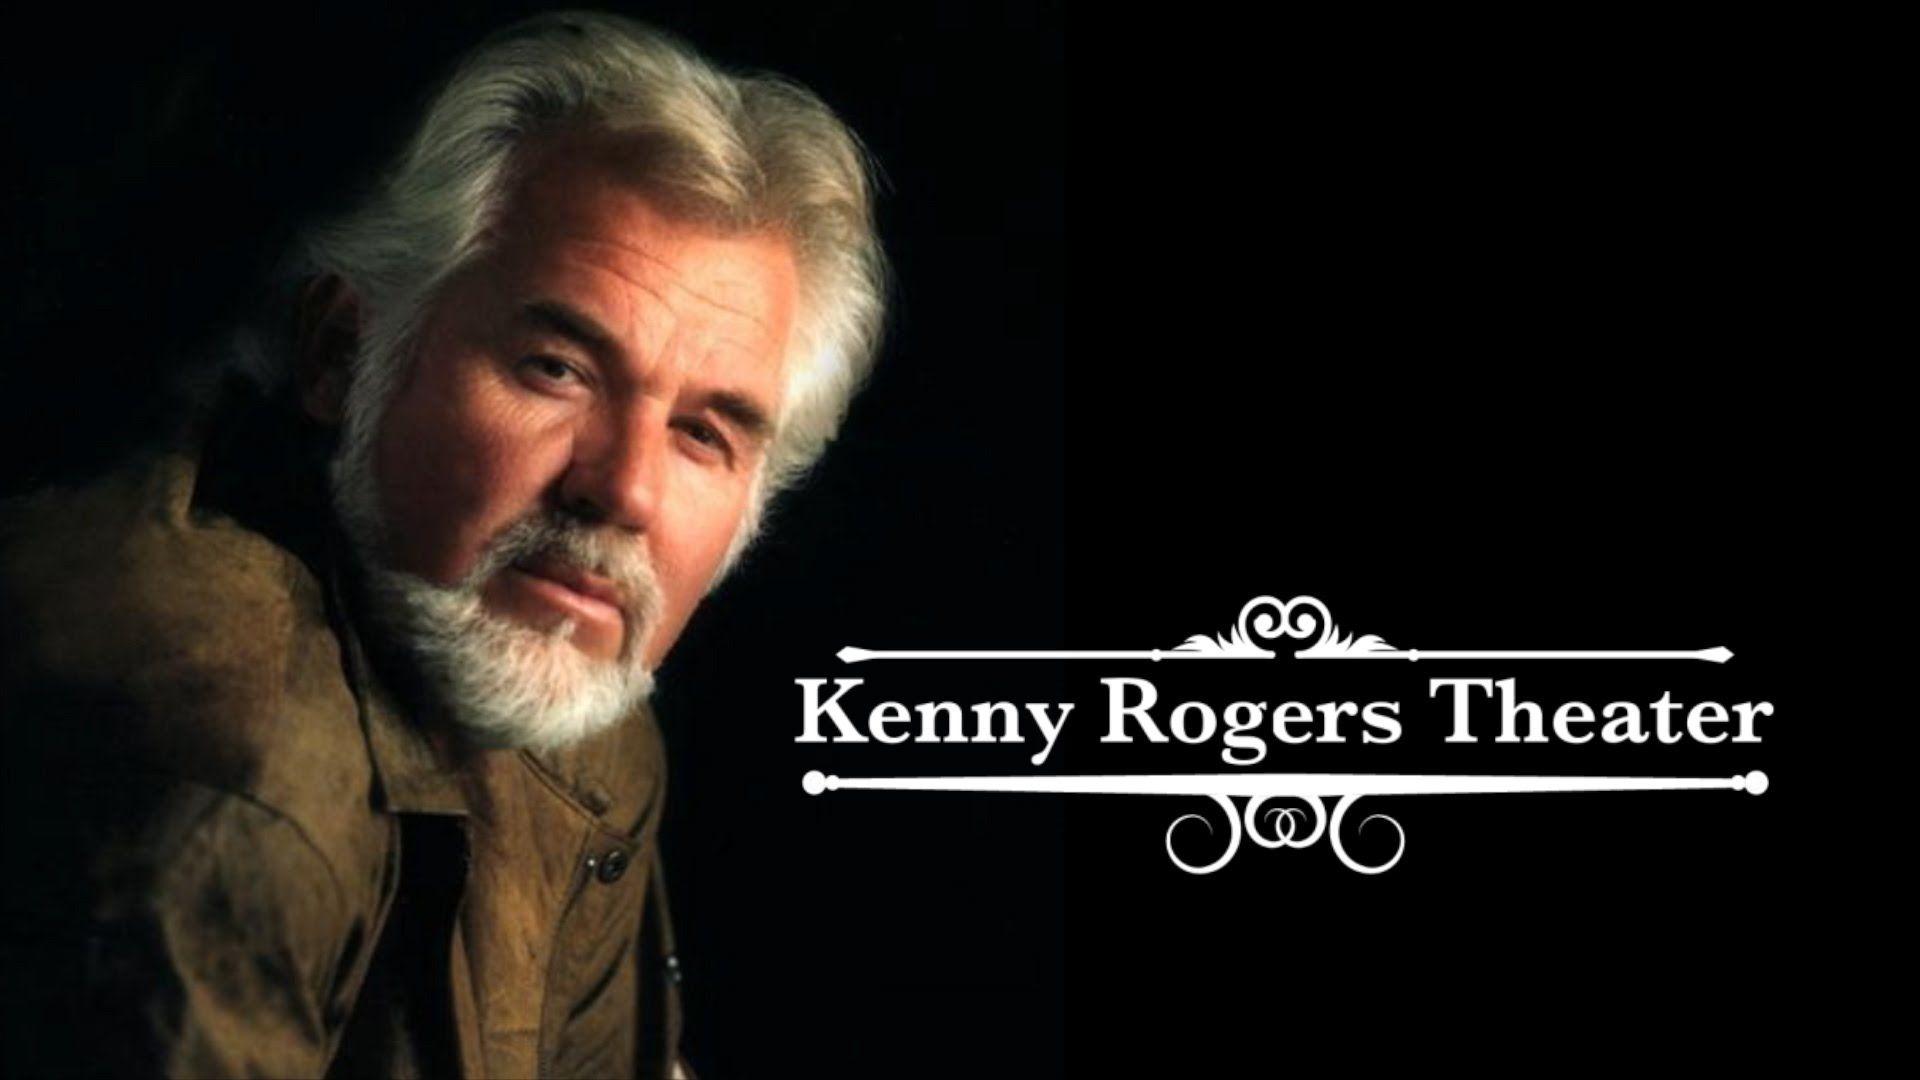 Kenny Rogers Theater: Round 1